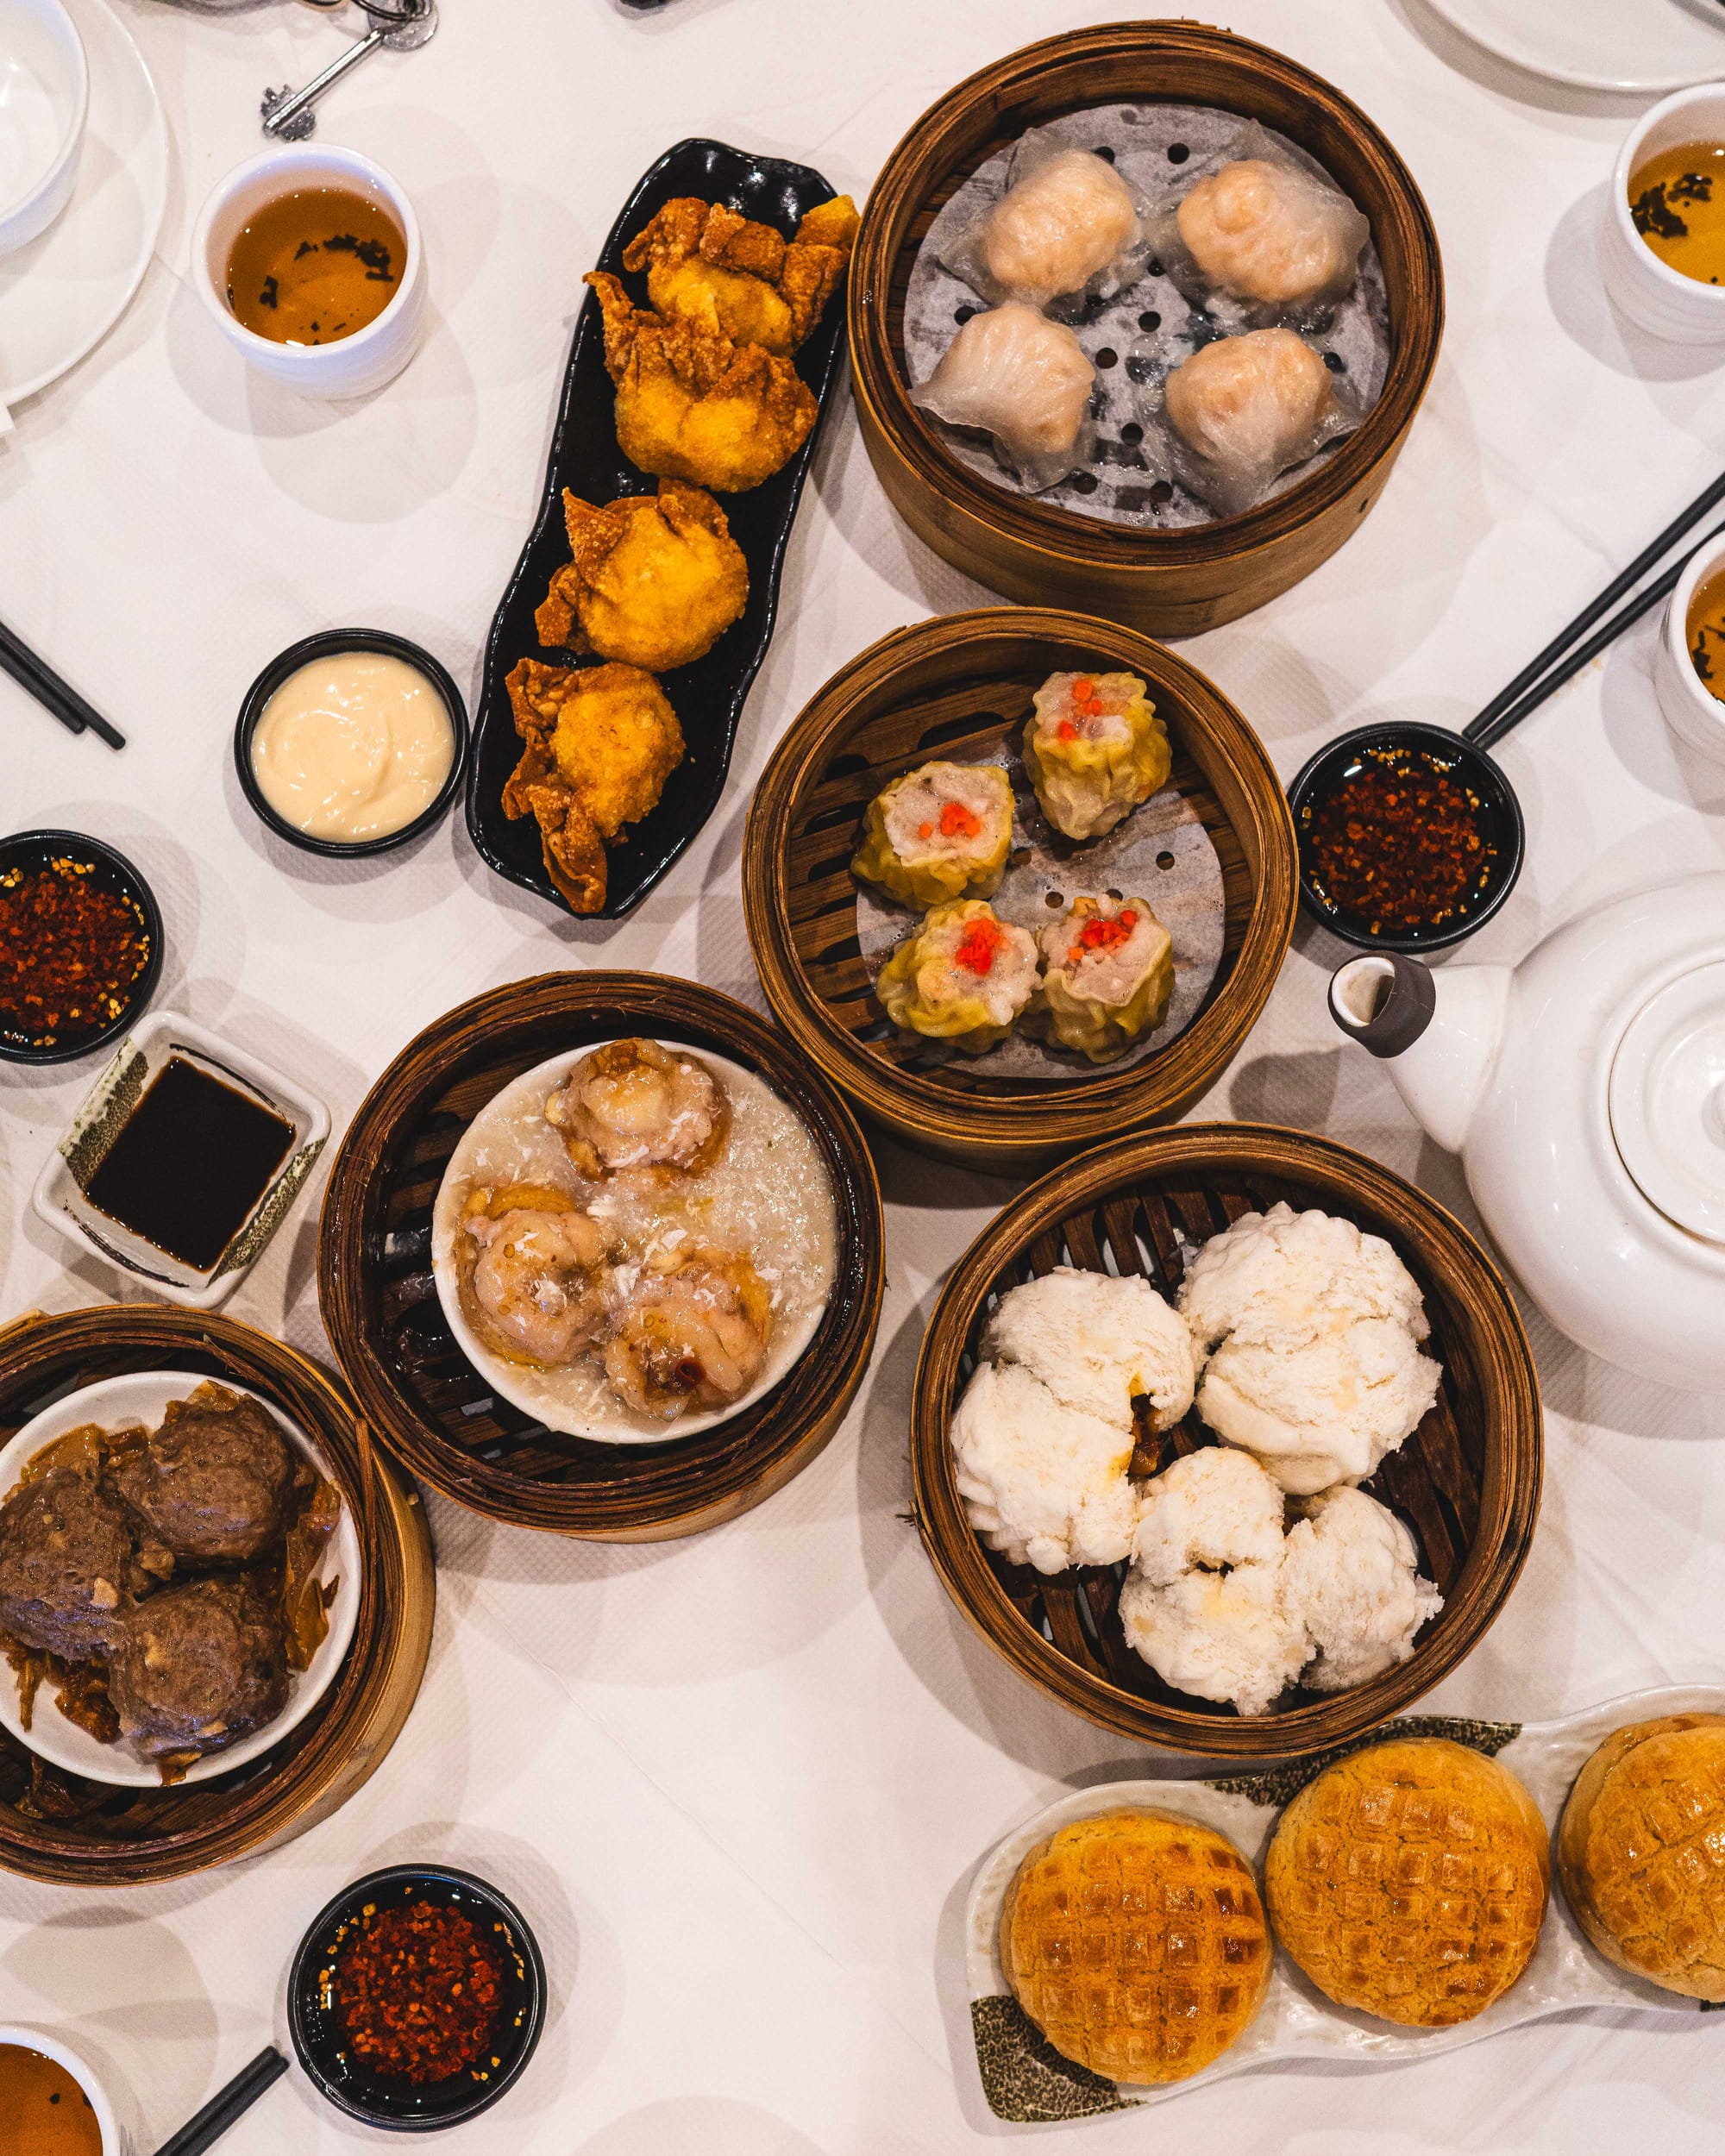 Top down shot of dim sum dishes on a white tablecloth